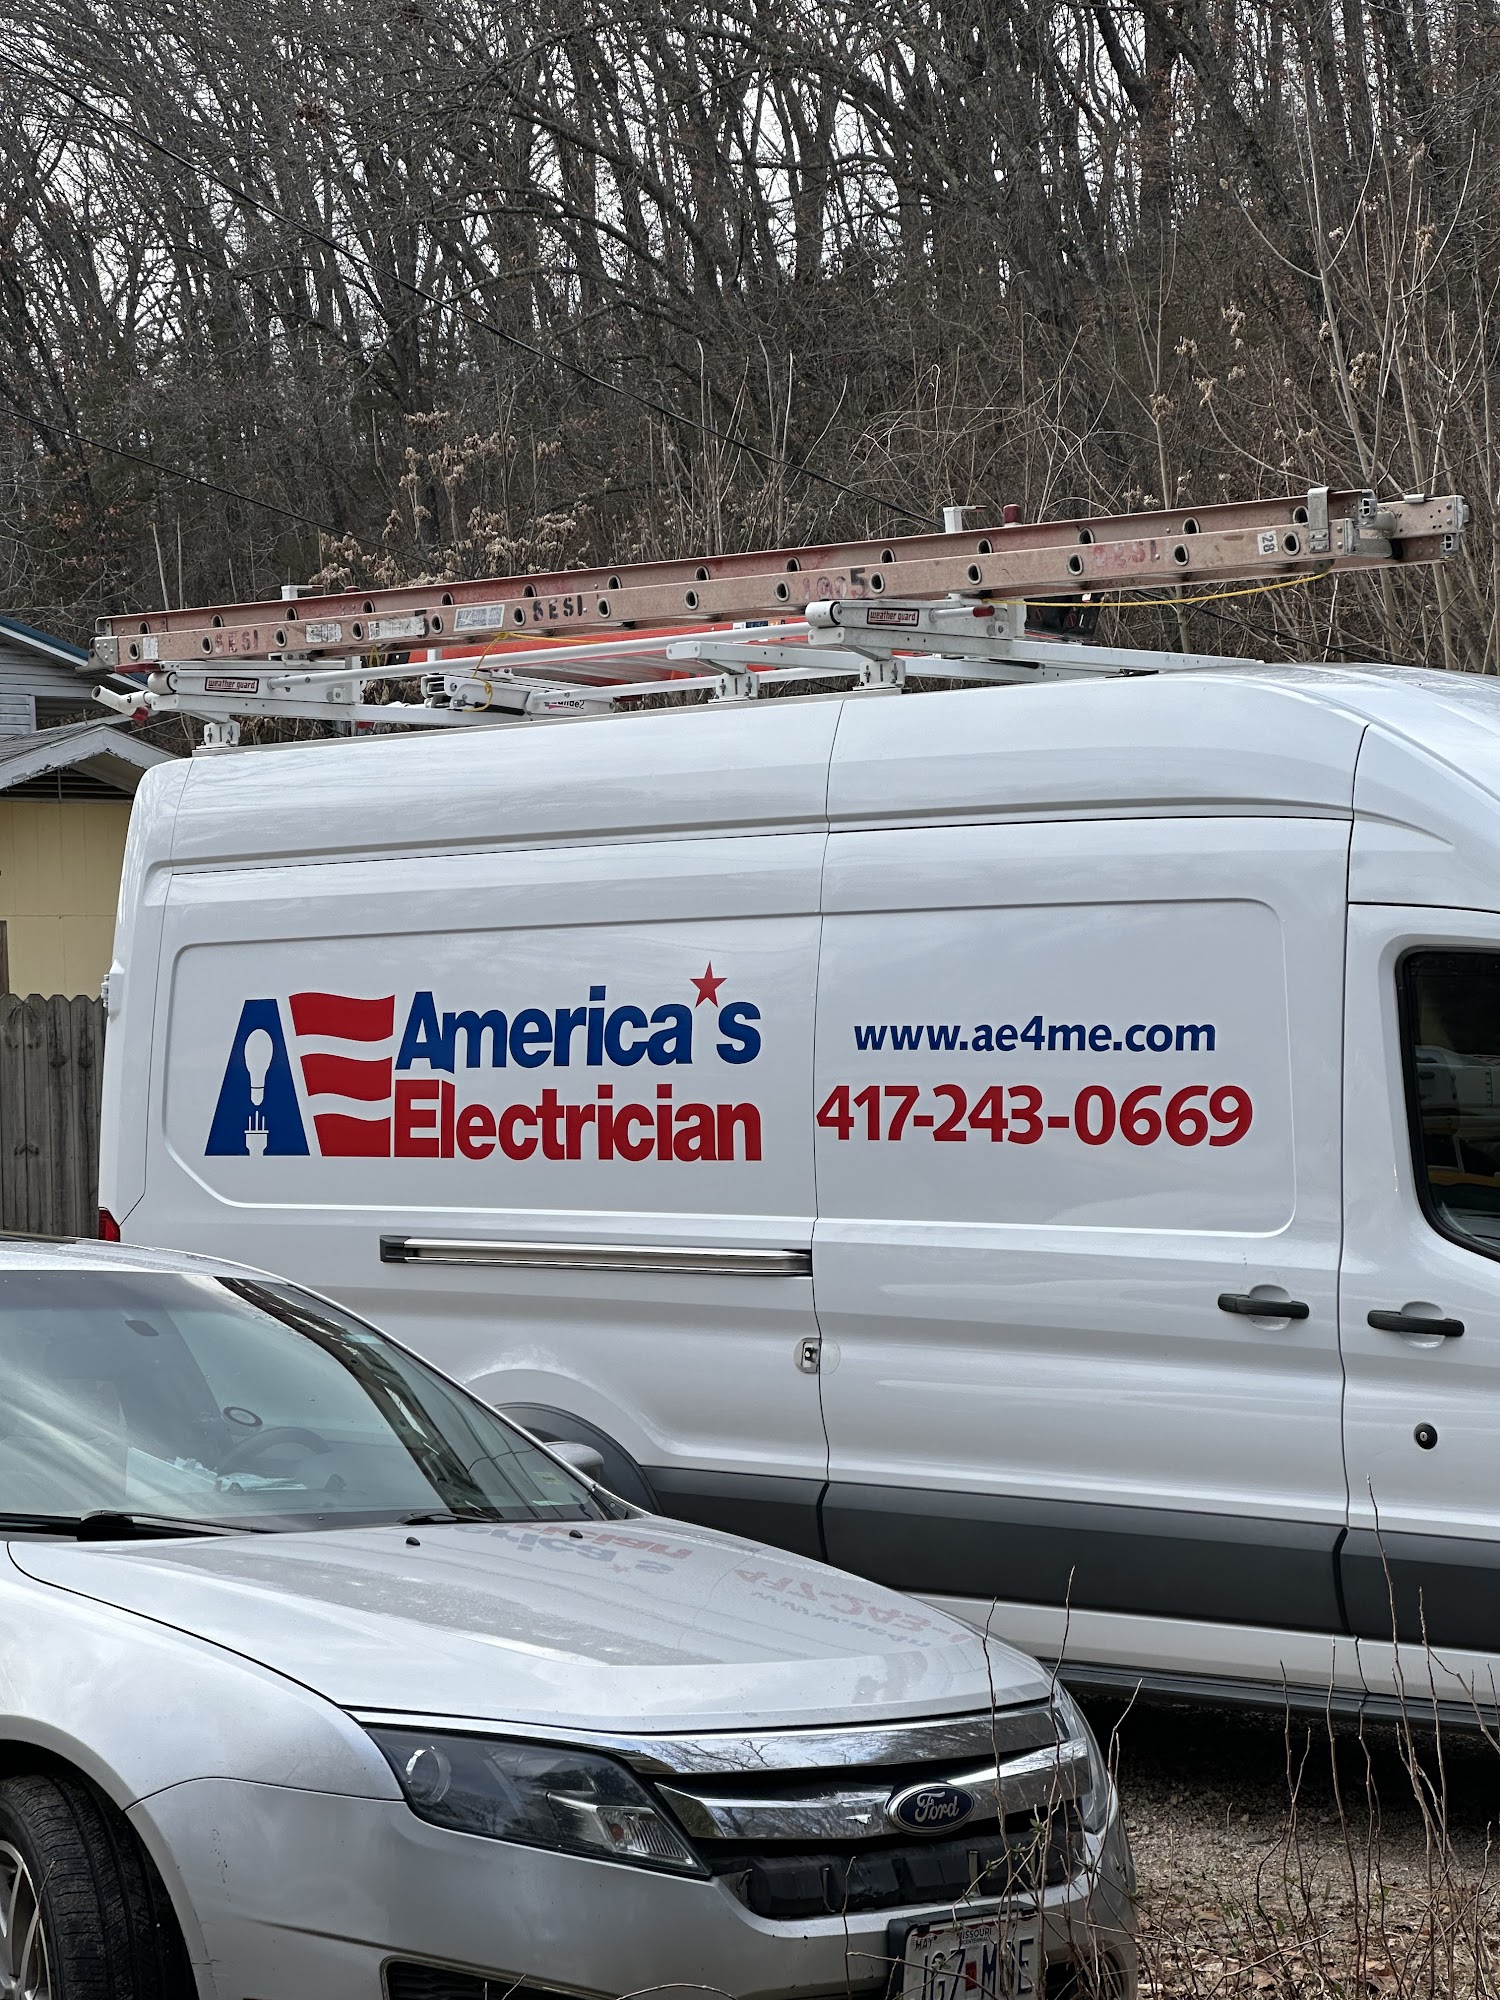 America’s Electrician Branson - Electrical Company ( Electrical Repair Services )